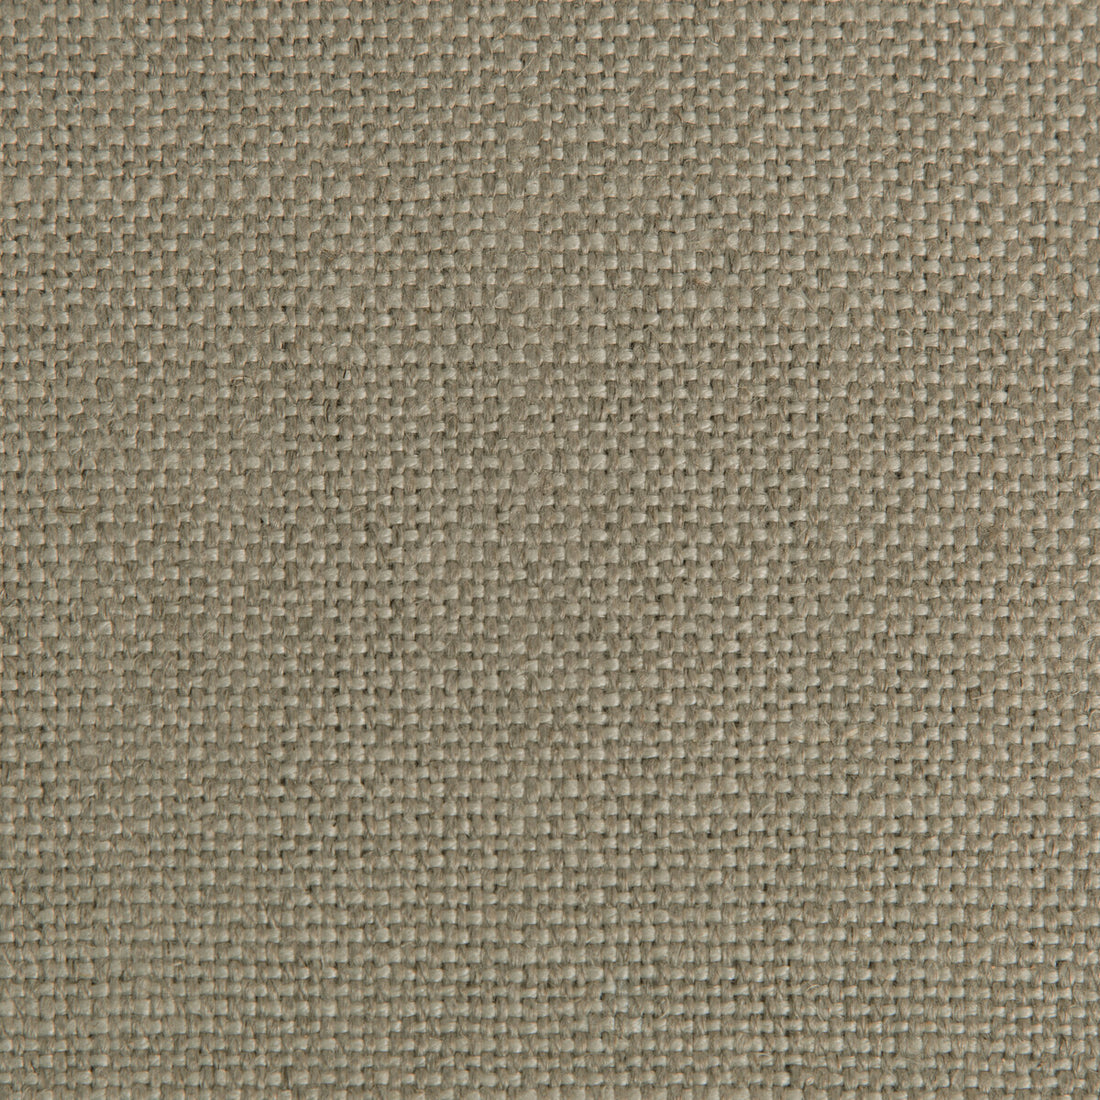 Buckley fabric in linen color - pattern 30983.1616.0 - by Kravet Design in the Thom Filicia collection